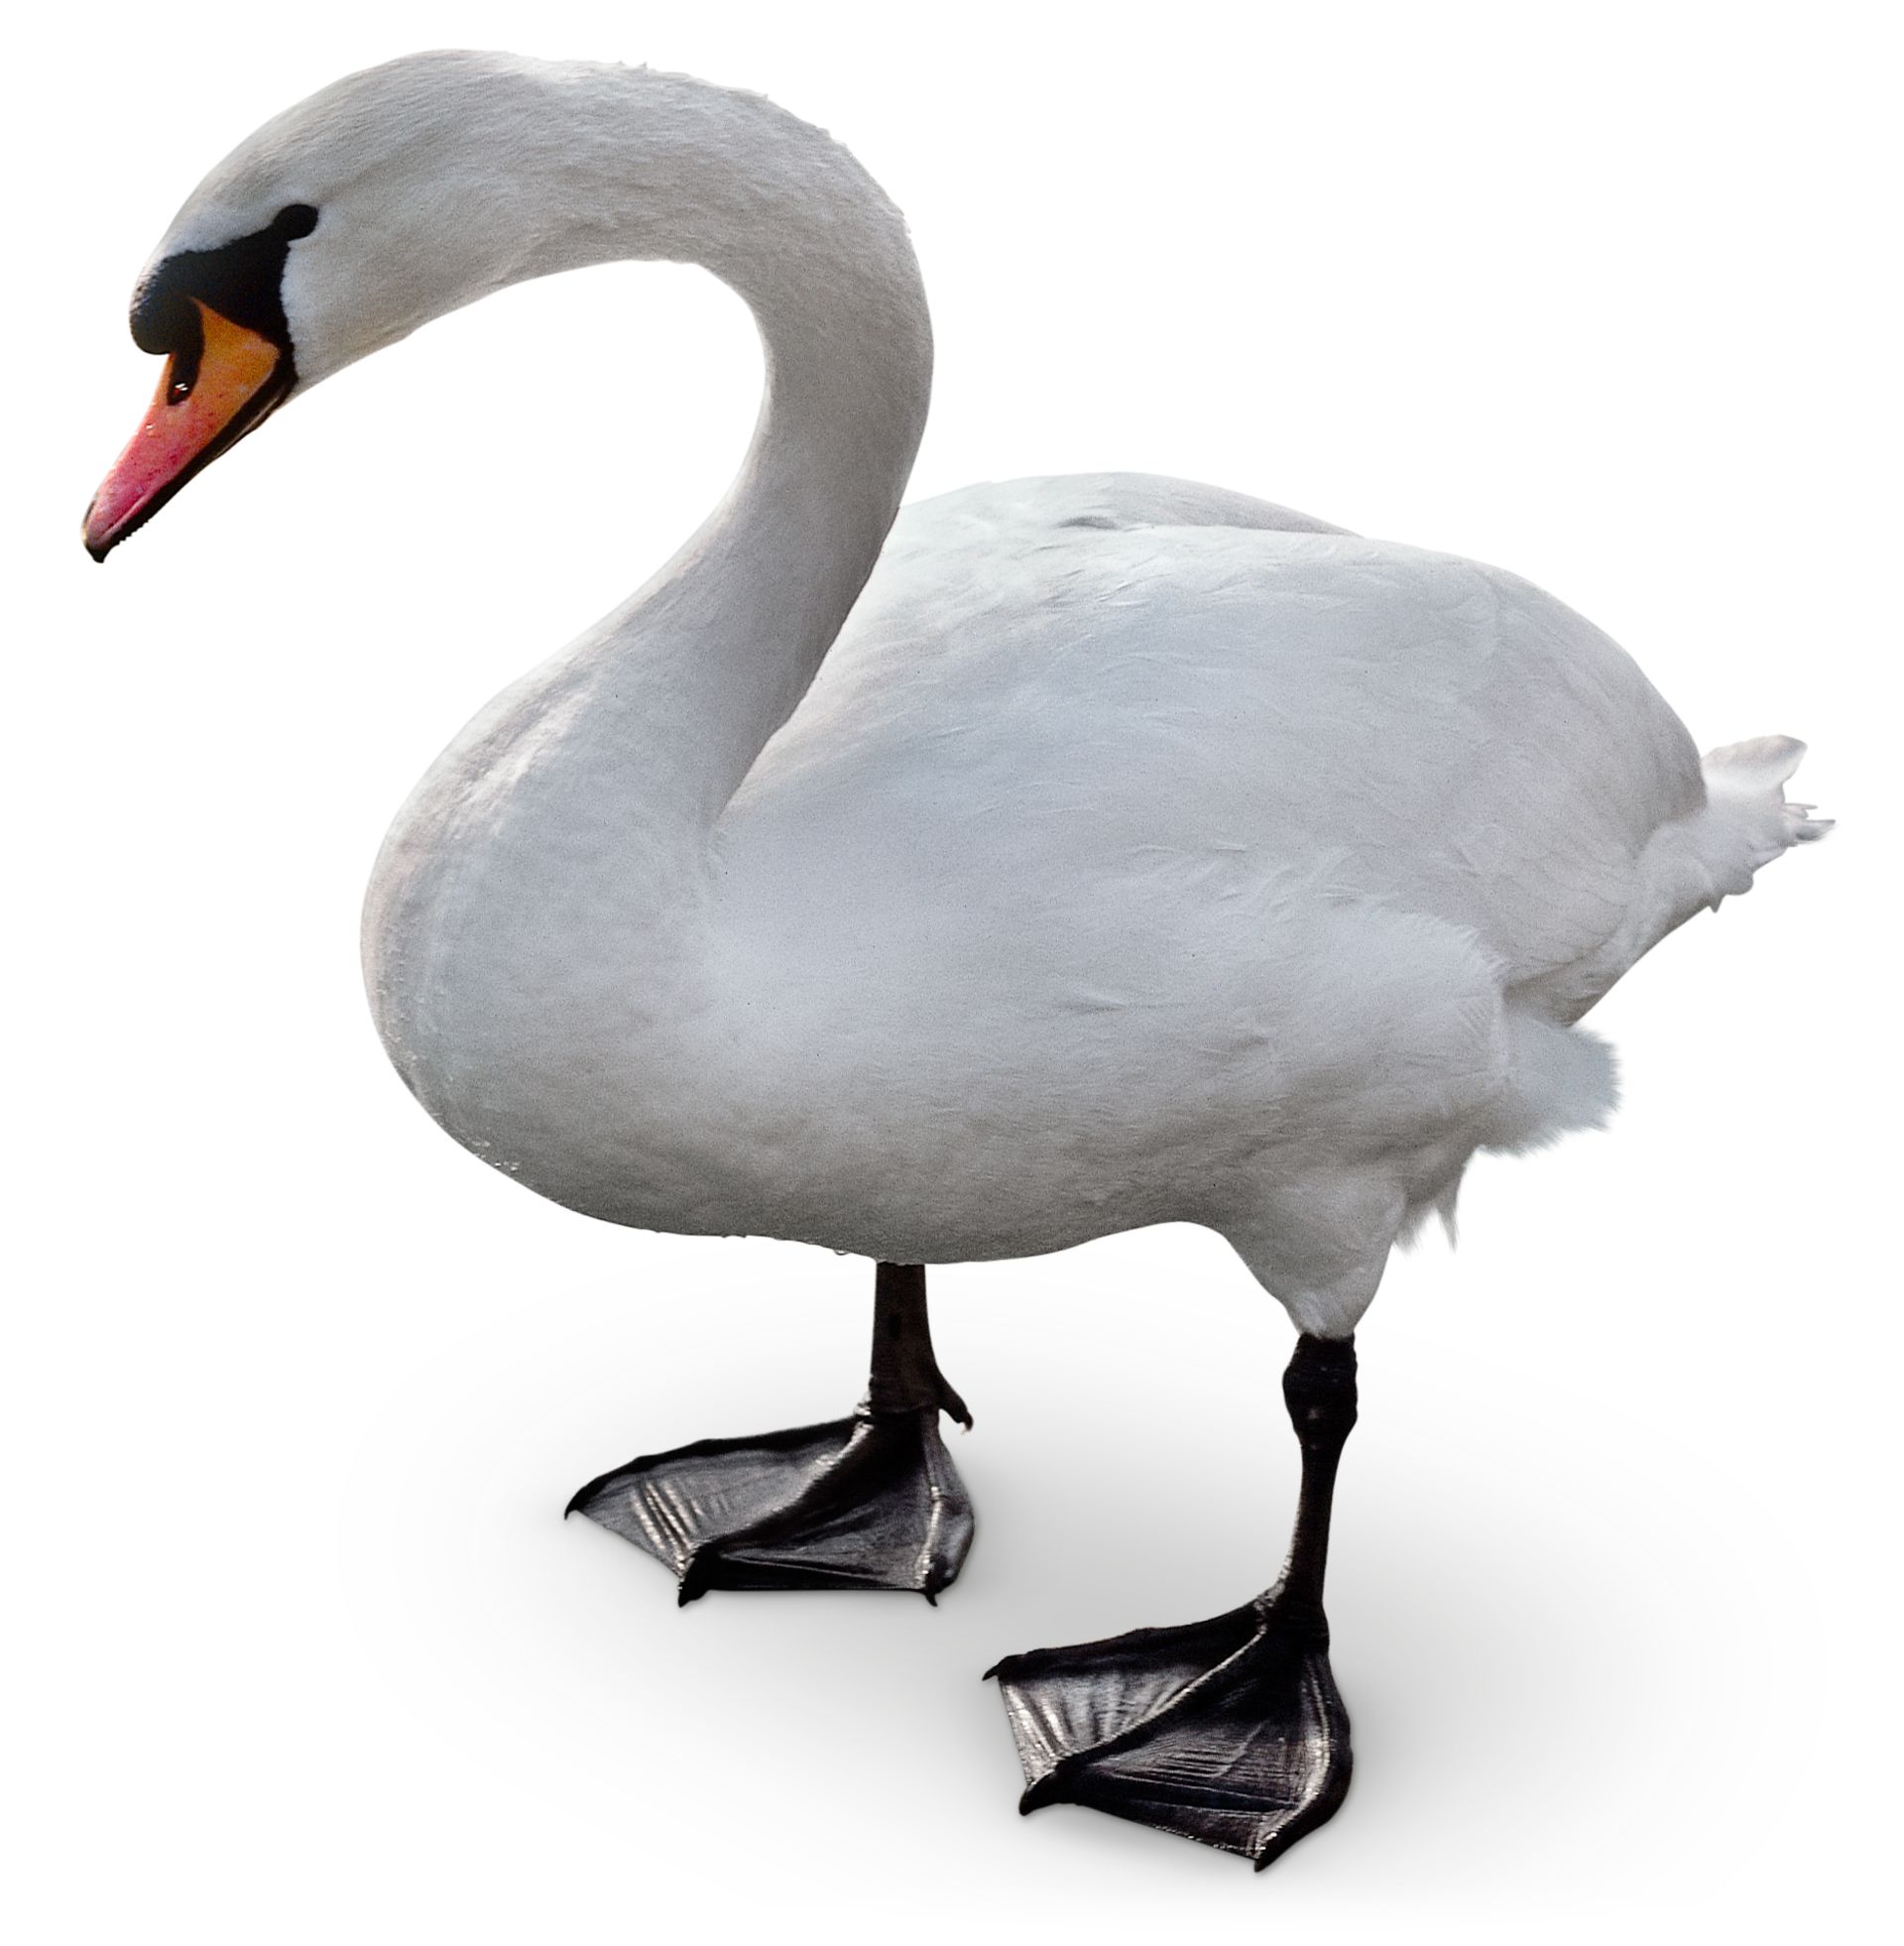 Facts About Swans | What Do Swans Eat | DK Find Out